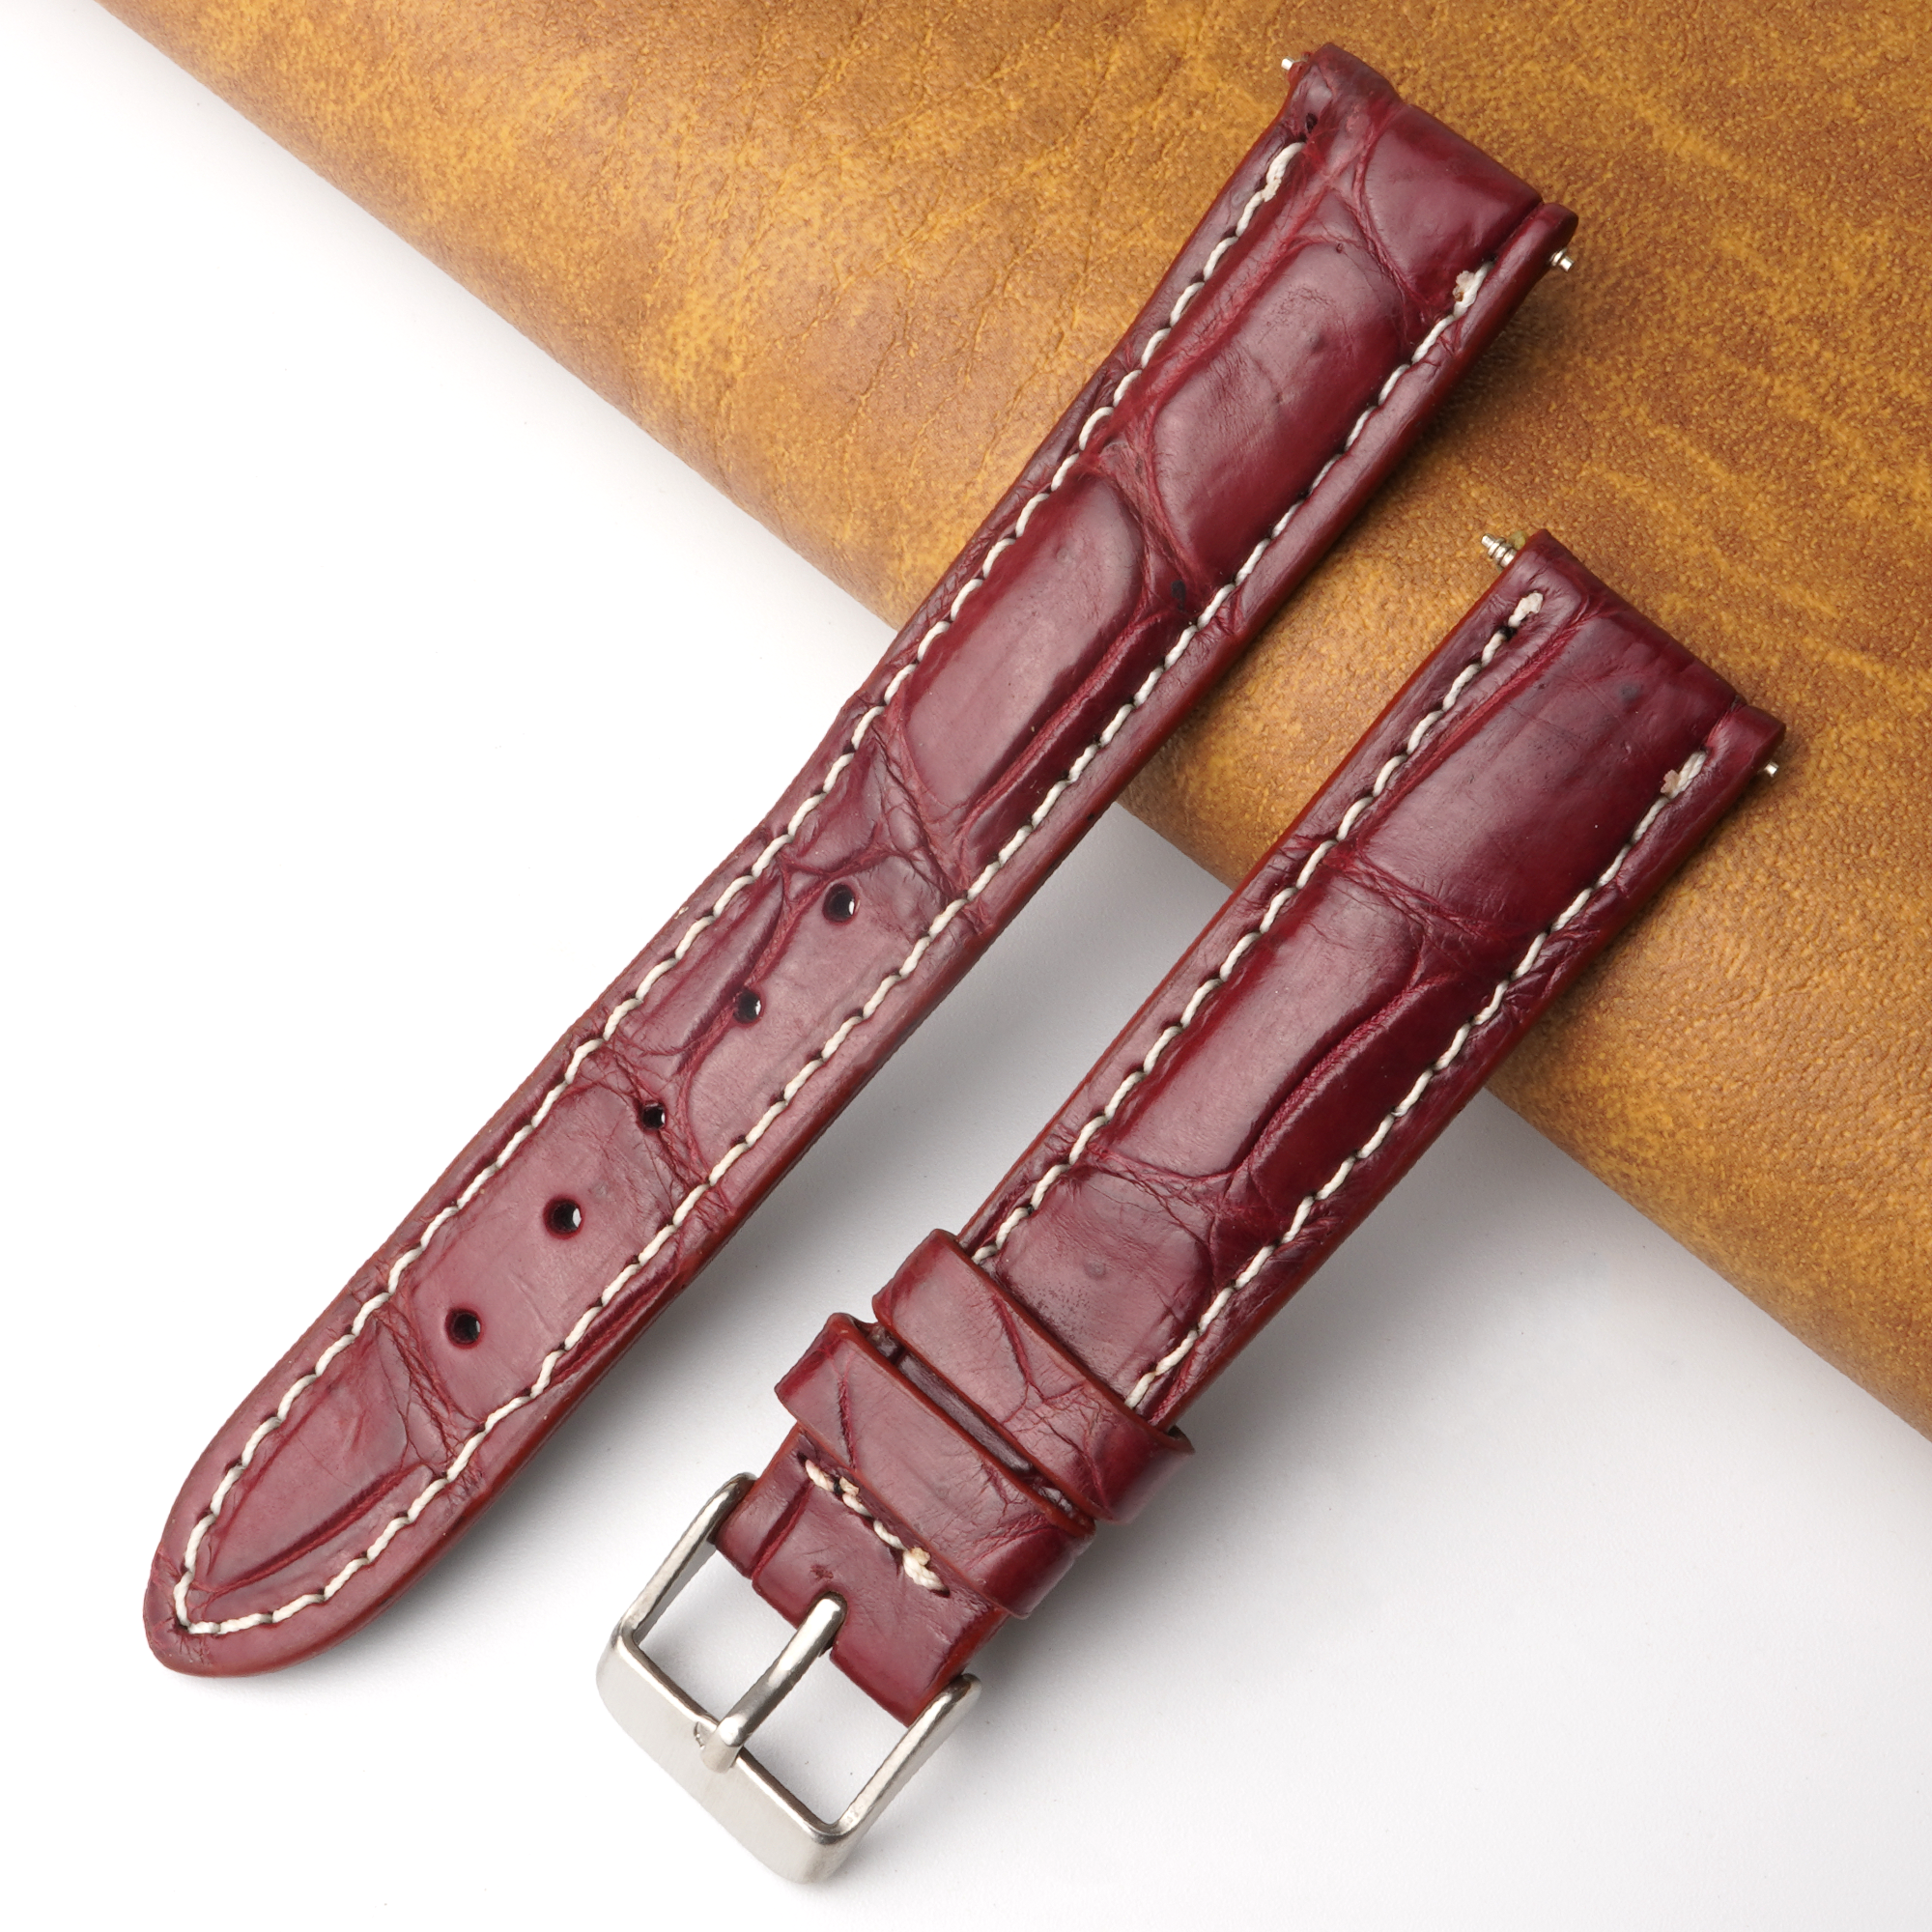 18mm Burgundy Unique Pattern Alligator Leather Watch Band For Men DH-224R